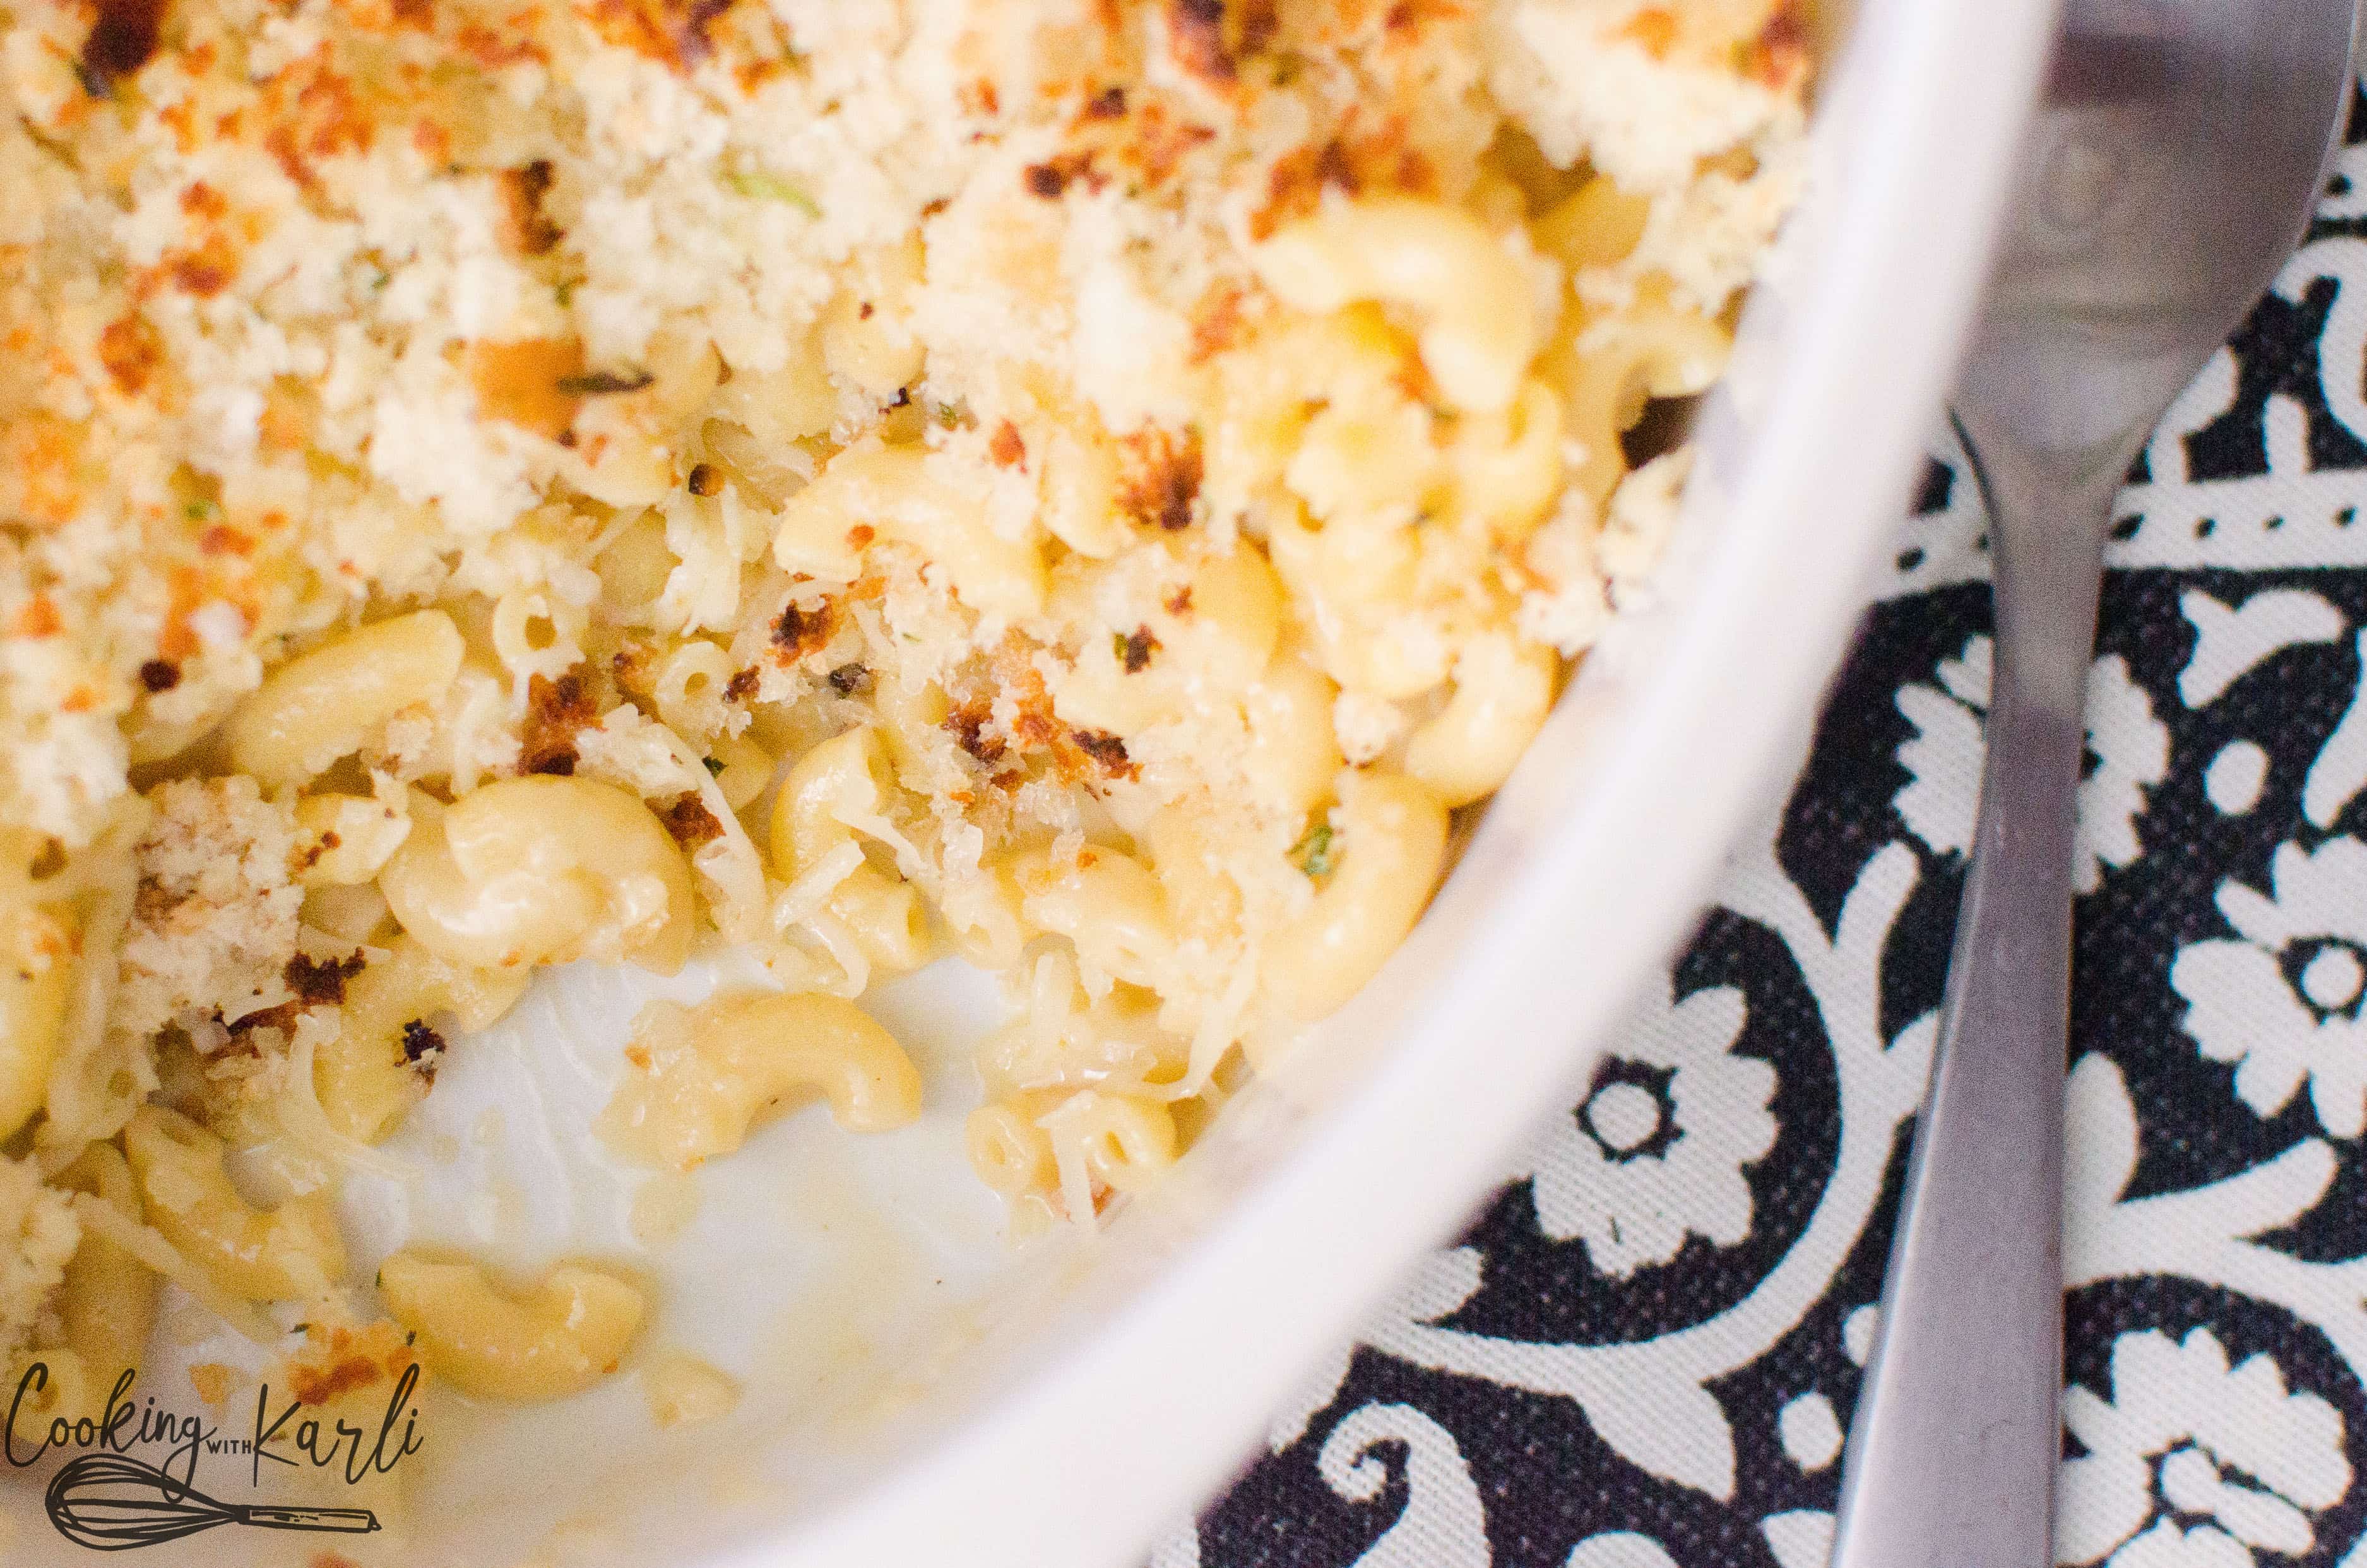 Instant Pot Mac 'n Cheese is equally fast and delicious! Perfectly cooked pasta, from scratch sauce and a crispy breadcrumb topping will knock your socks off! Perfect for ages 1-101!